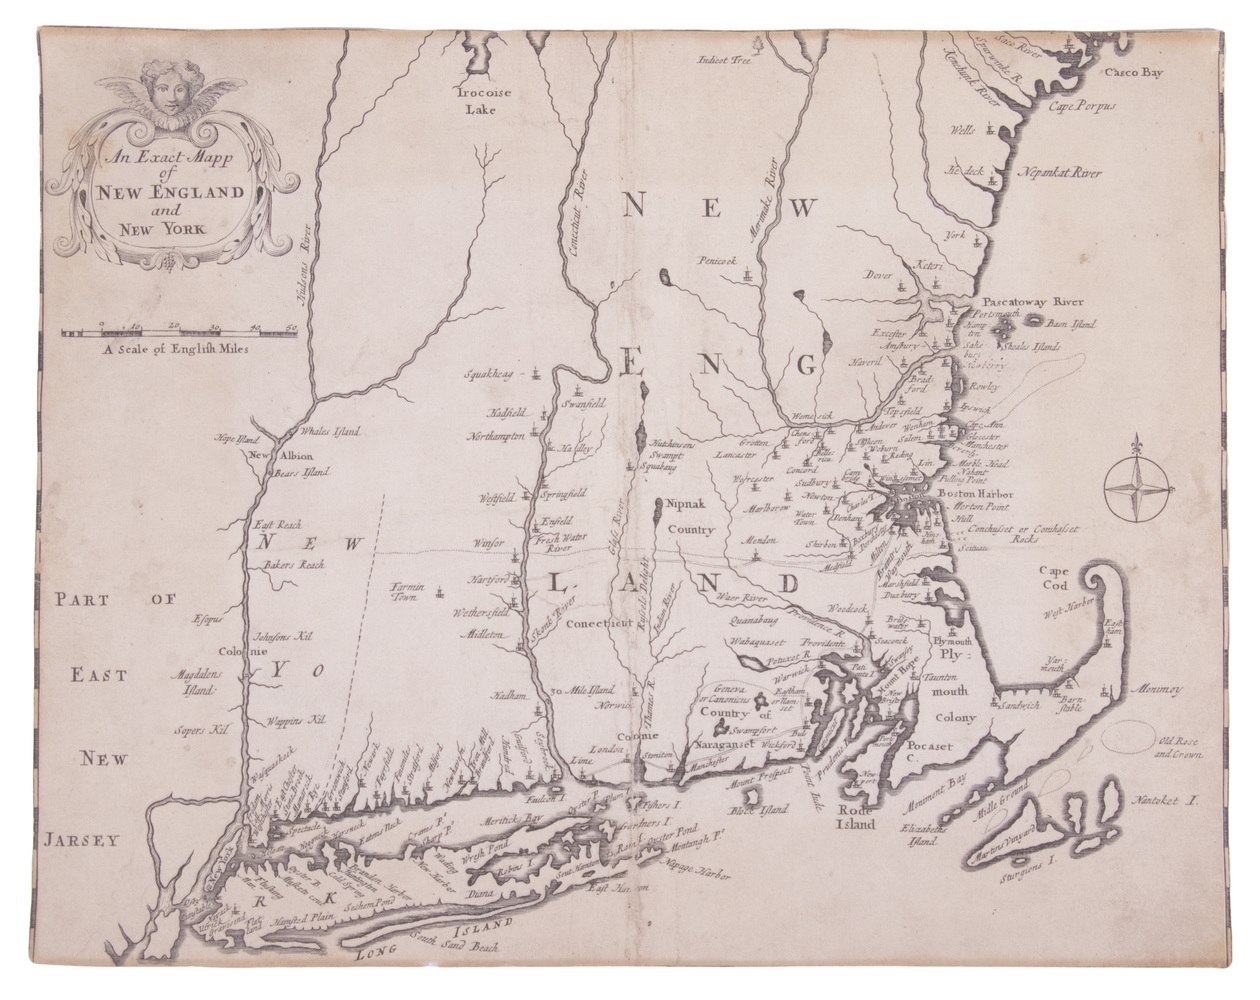  AN EXACT MAPP OF NEW ENGLAND AND 3b67b0